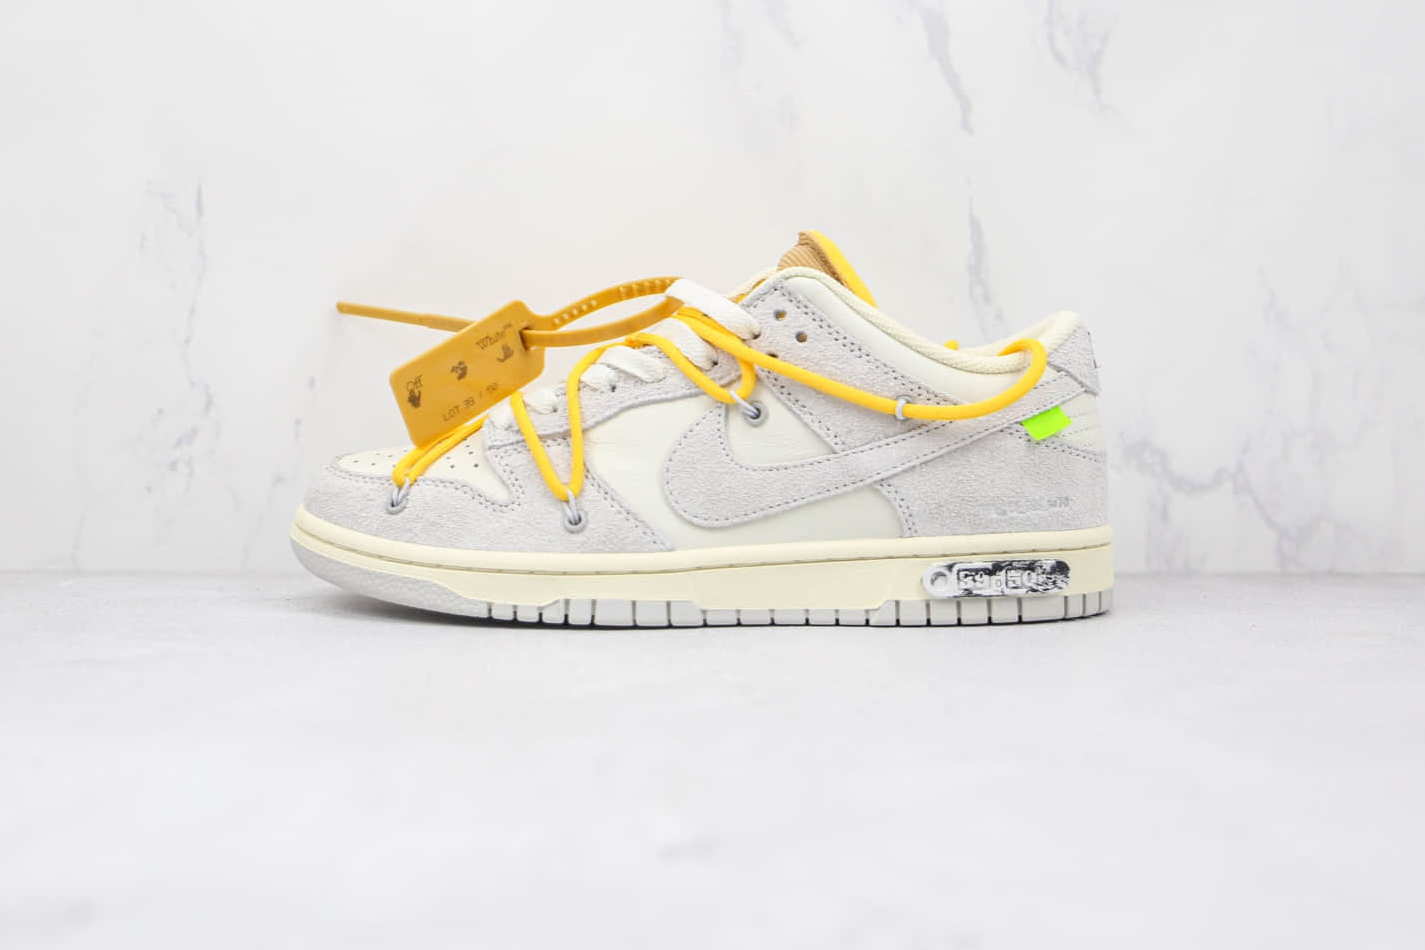 Nike Off-White x Dunk Low 'Lot 39 of 50' DJ0950-109 - Limited Edition Collaboration Sneakers